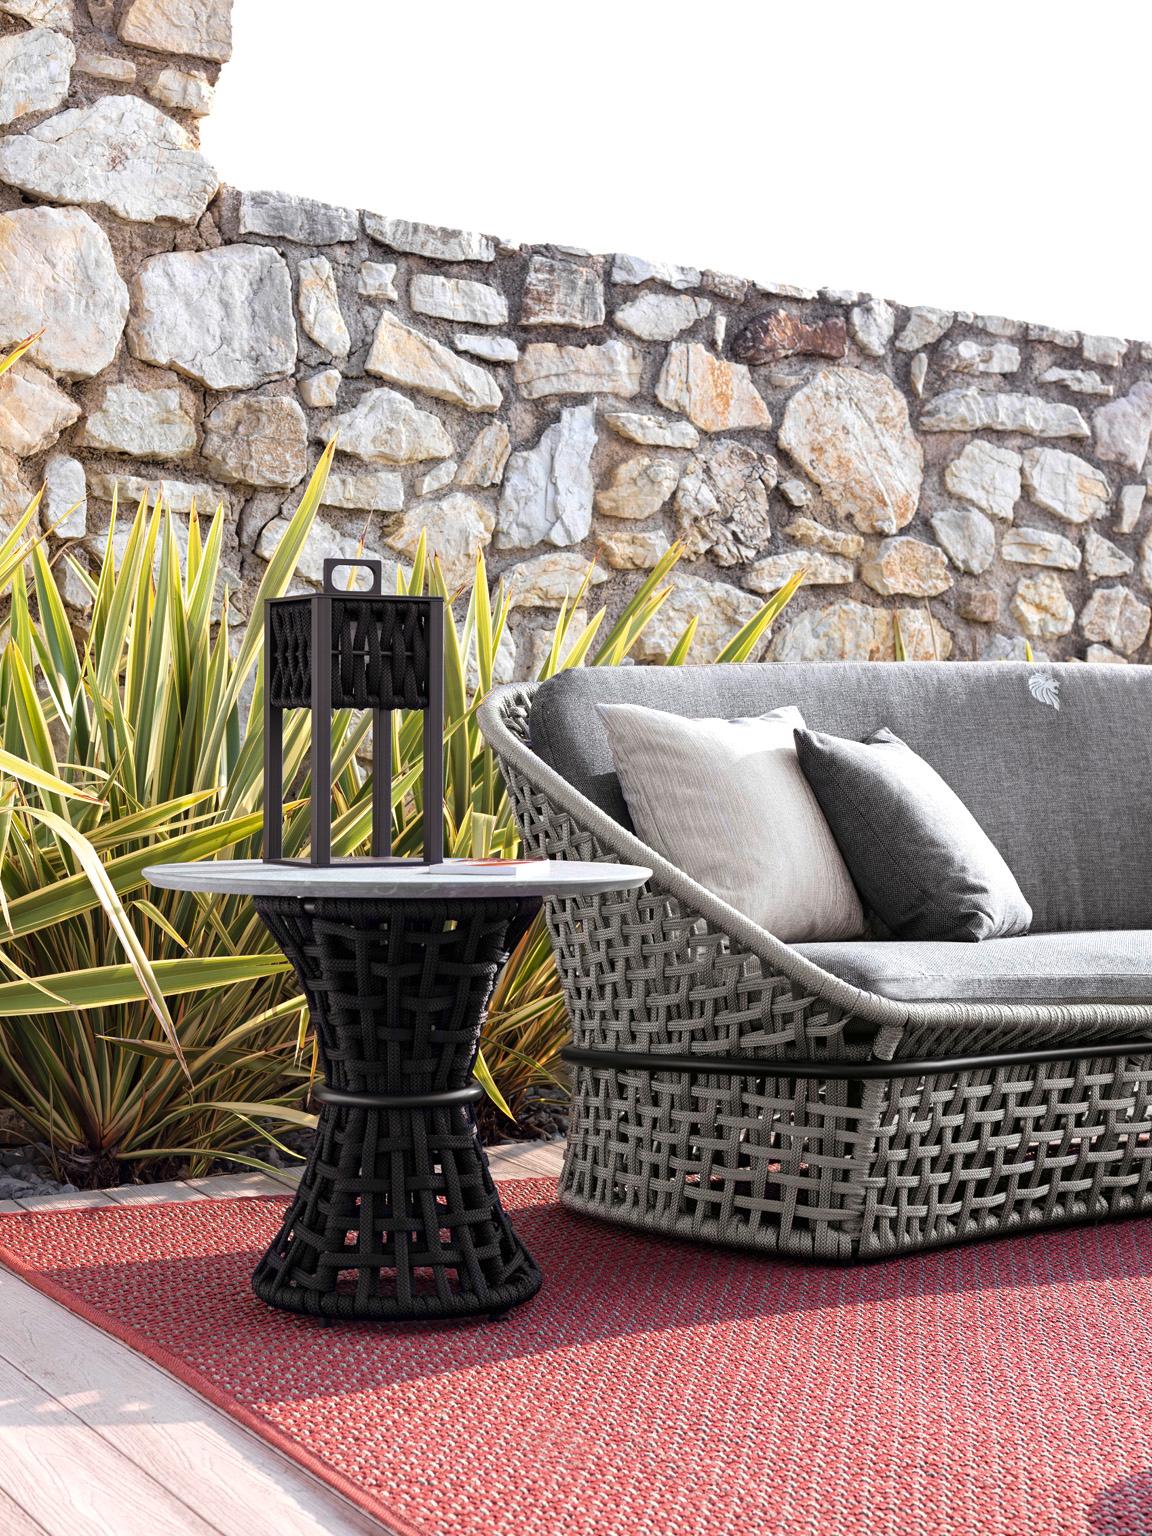 Giorgio Collection Dune Outdoor Garden Collection
Outdoor lamp end table in combination of satined black metal treated in cataphoresis and light grey woven cordage. 
Top in treated 